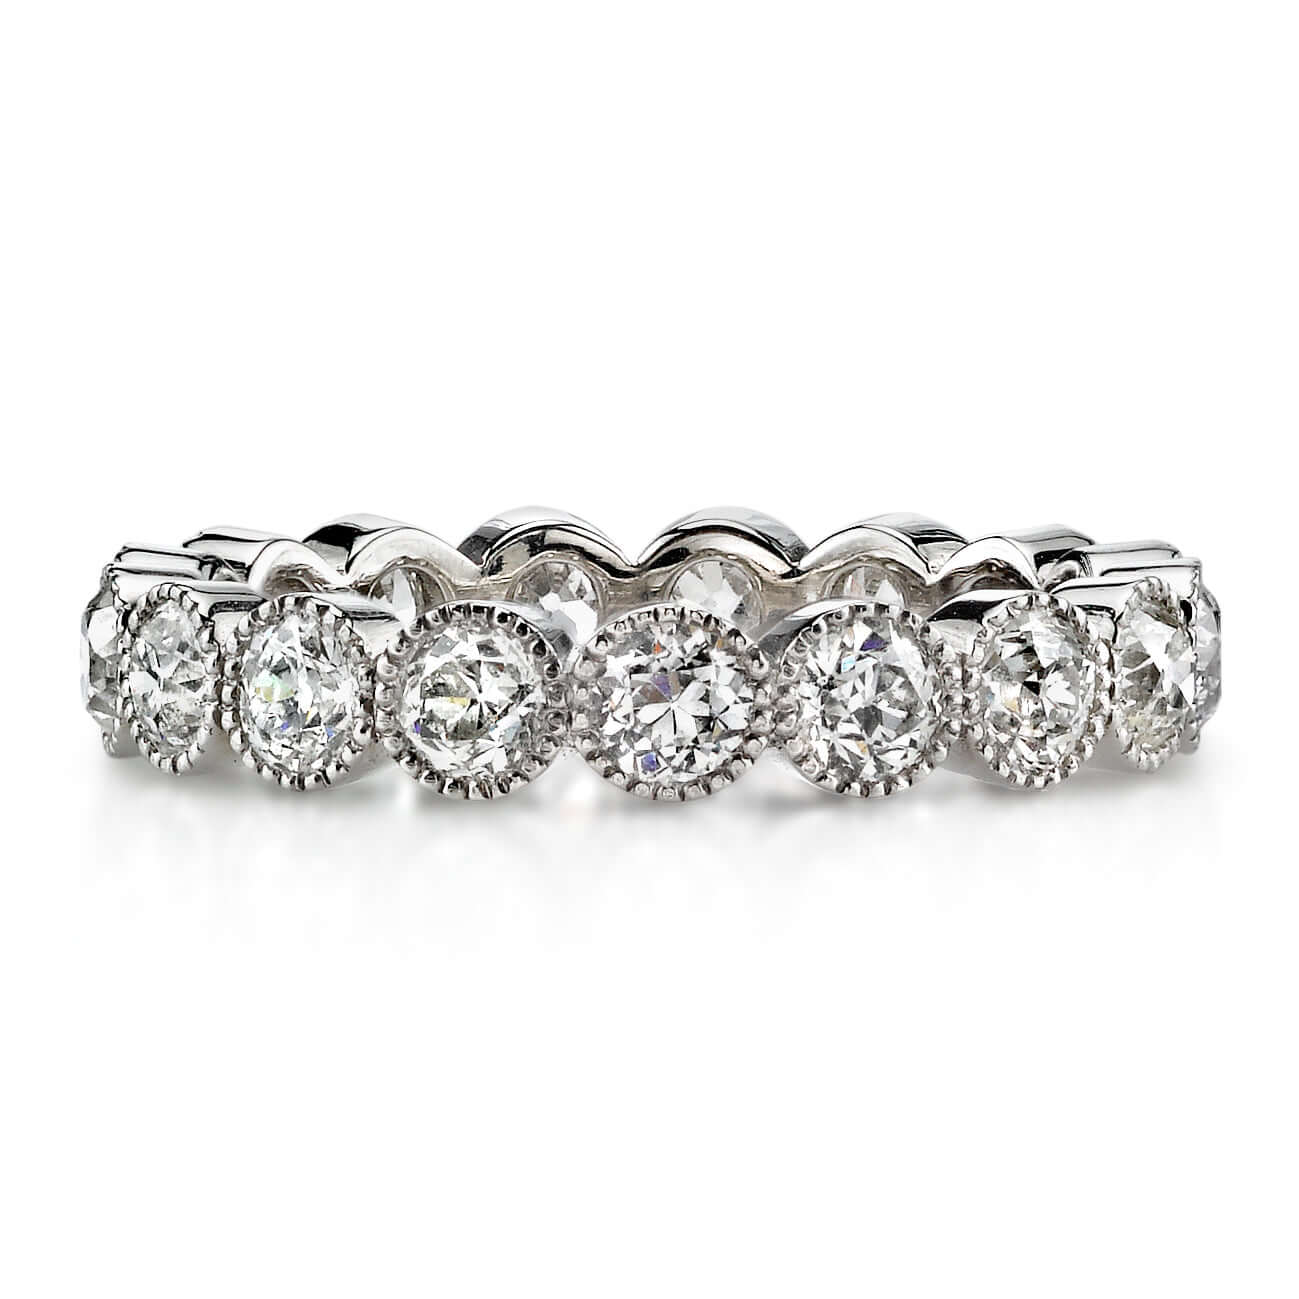 SINGLE STONE MEDIUM GABBY BAND | Approximately 1.75ctw old European cut diamonds set in a handcrafted bezel set eternity band. Approximate band with 3.6mm. Please inquire for additional customization.